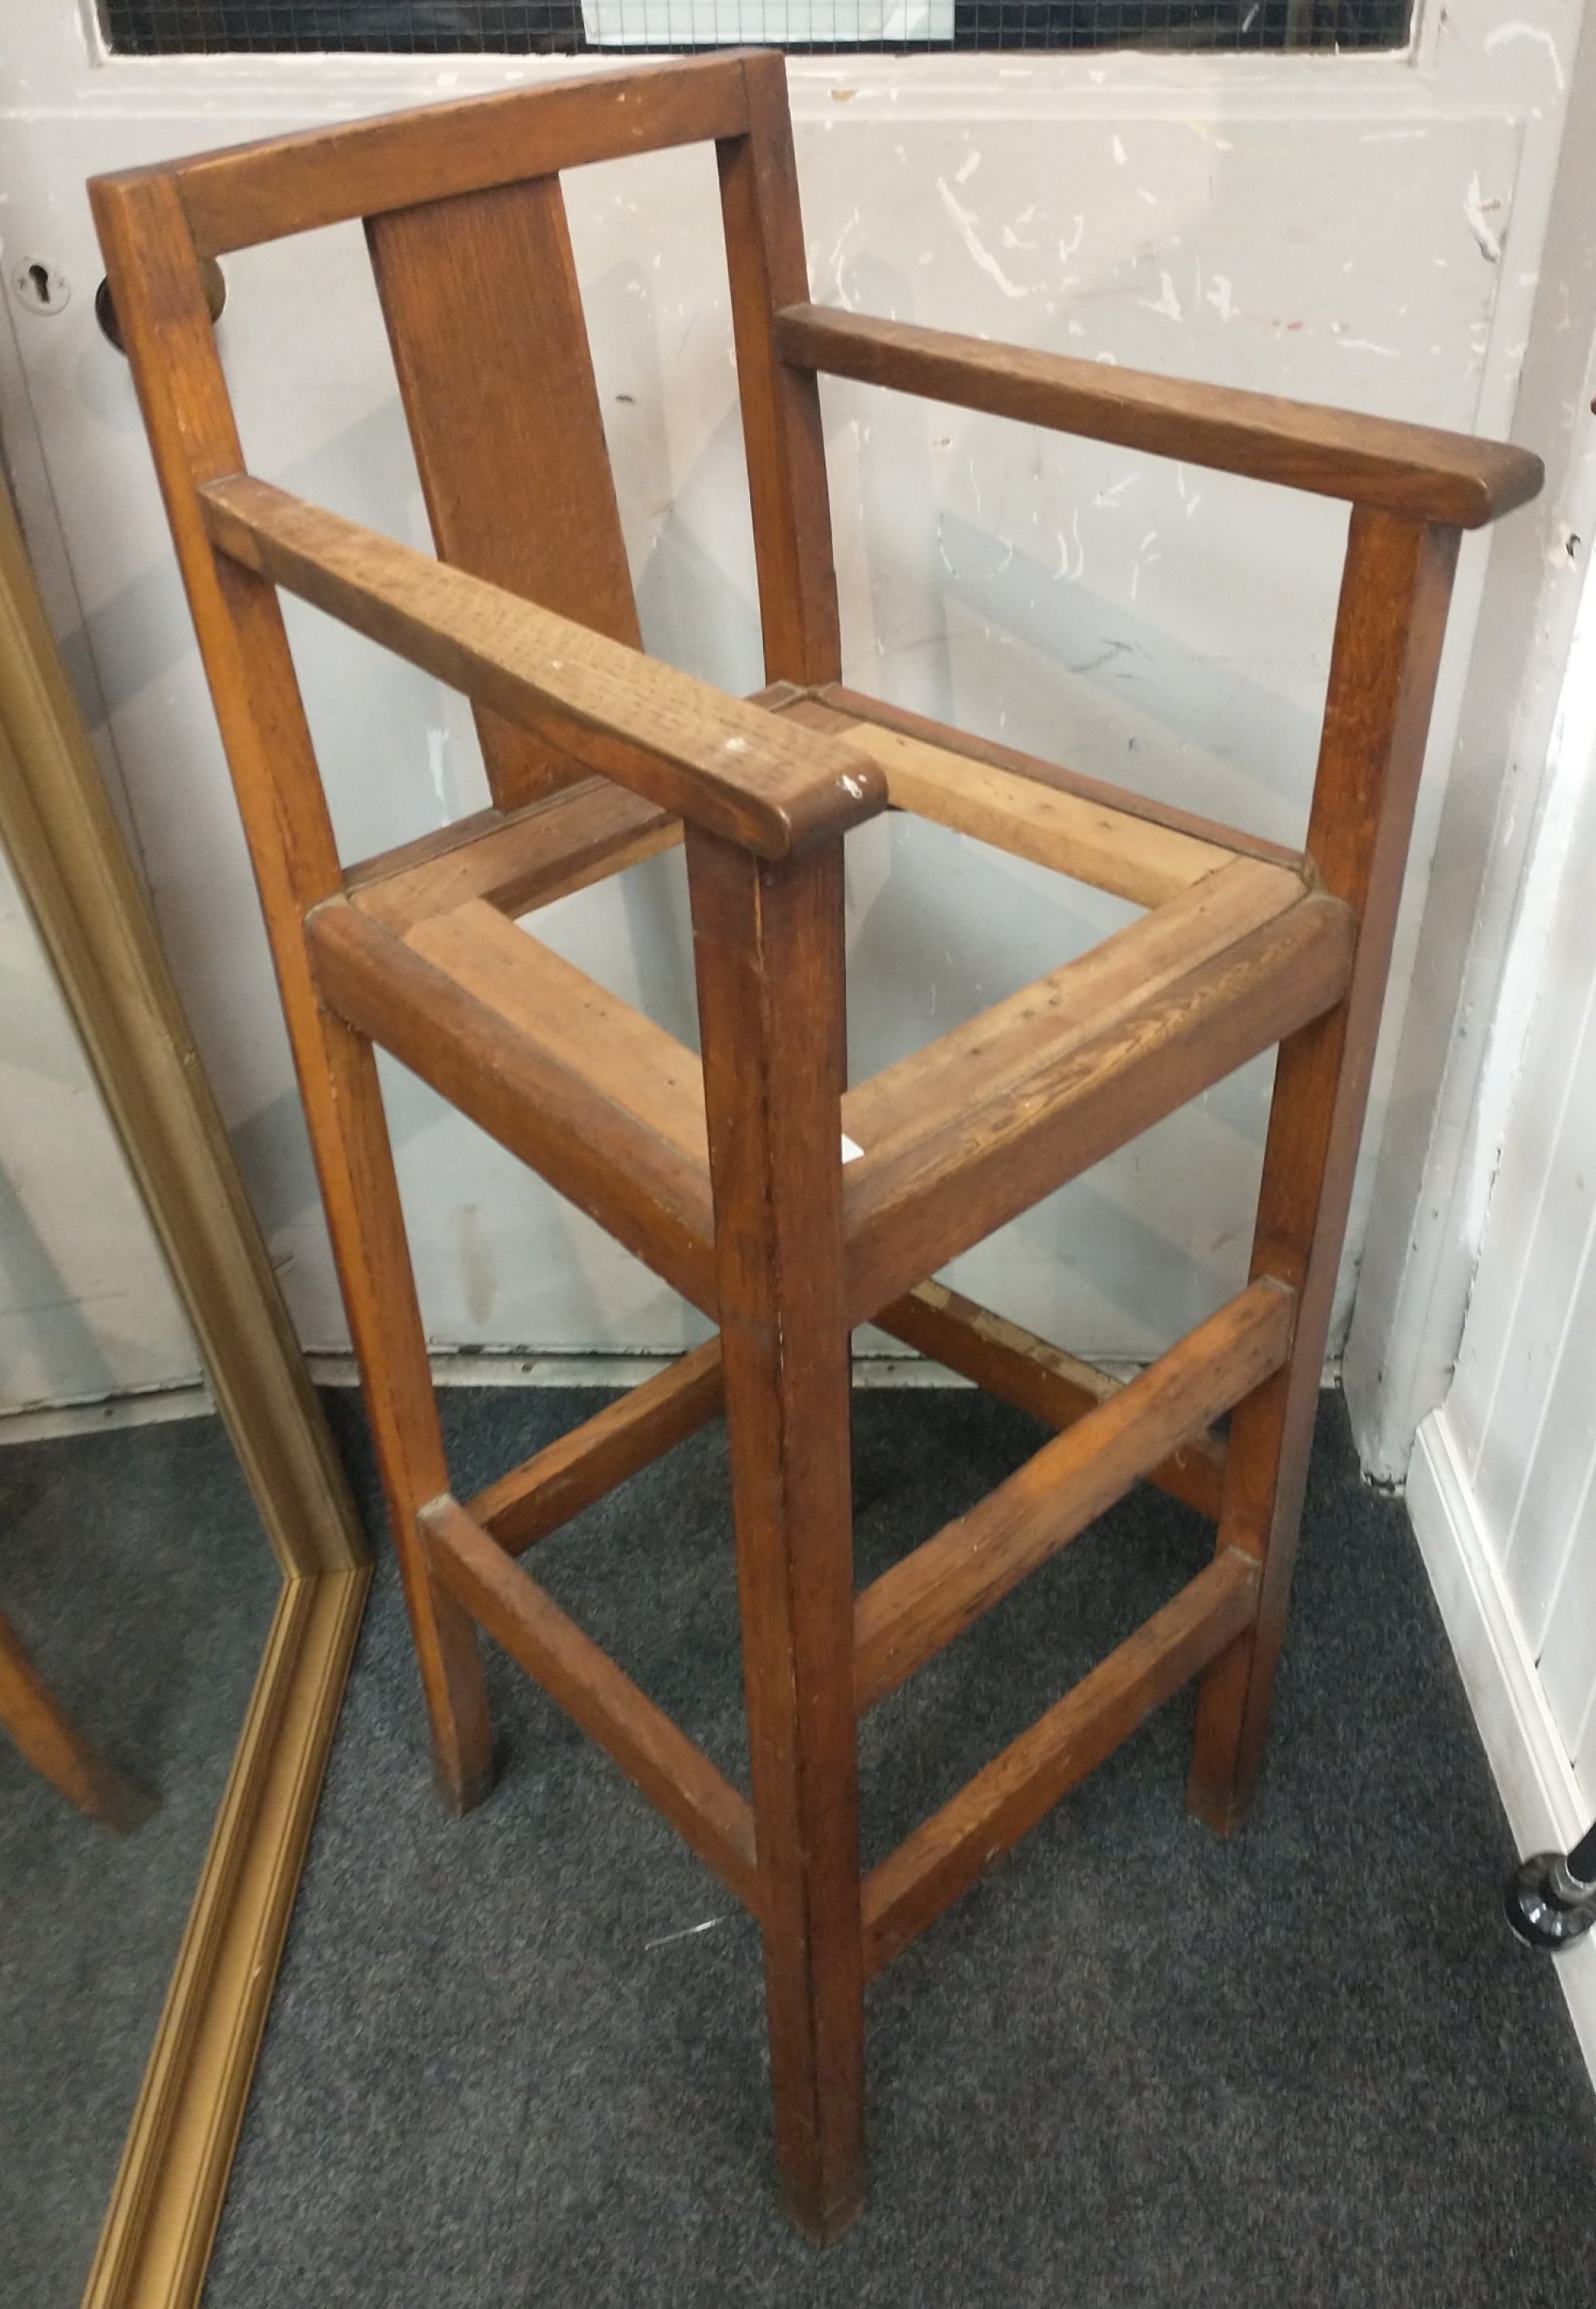 Vintage wooden high chair approx 1m tall, 42cm wide and 45cm deep